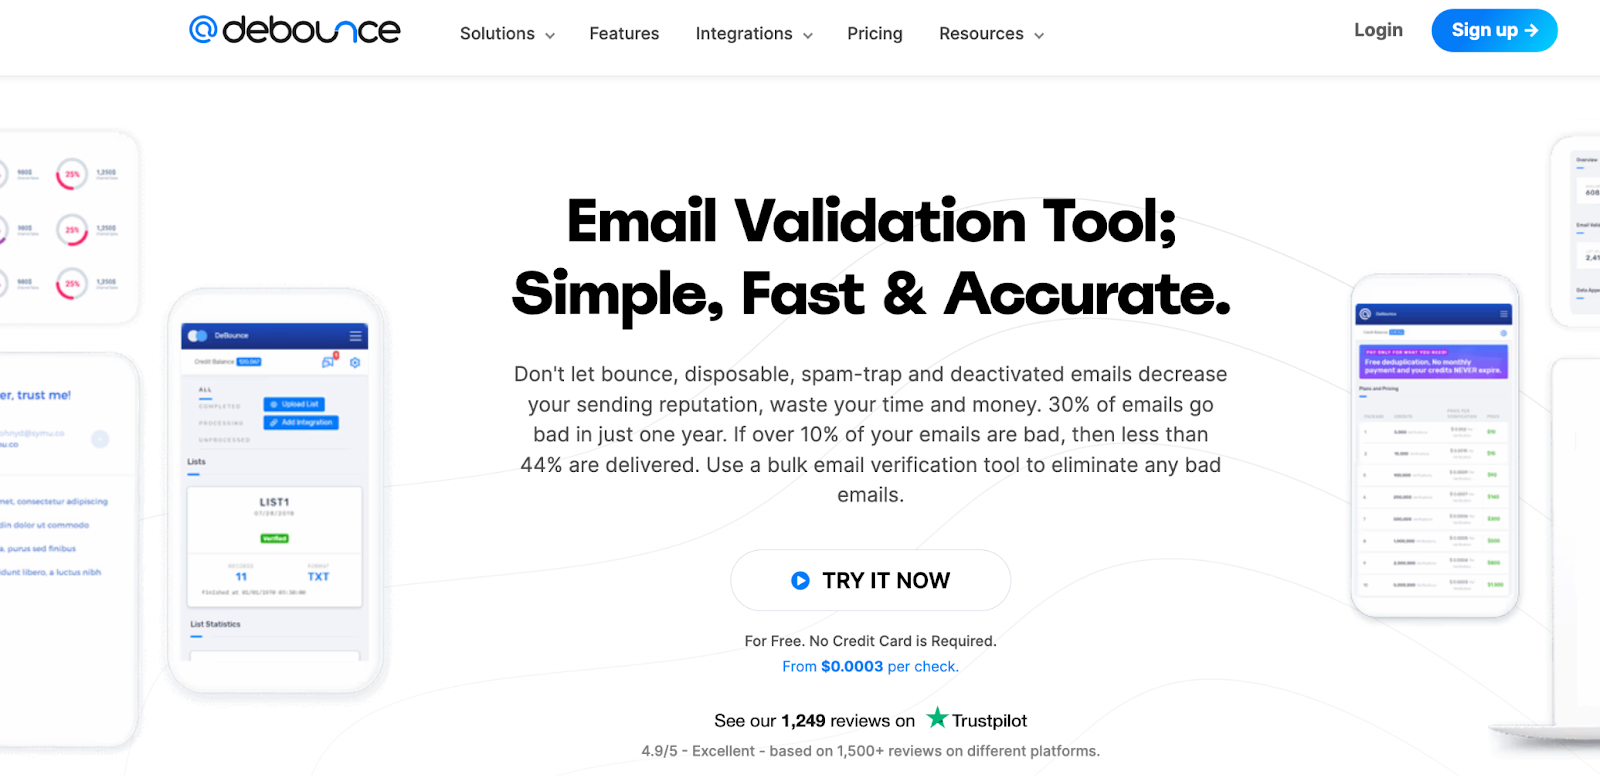 Email verification tool